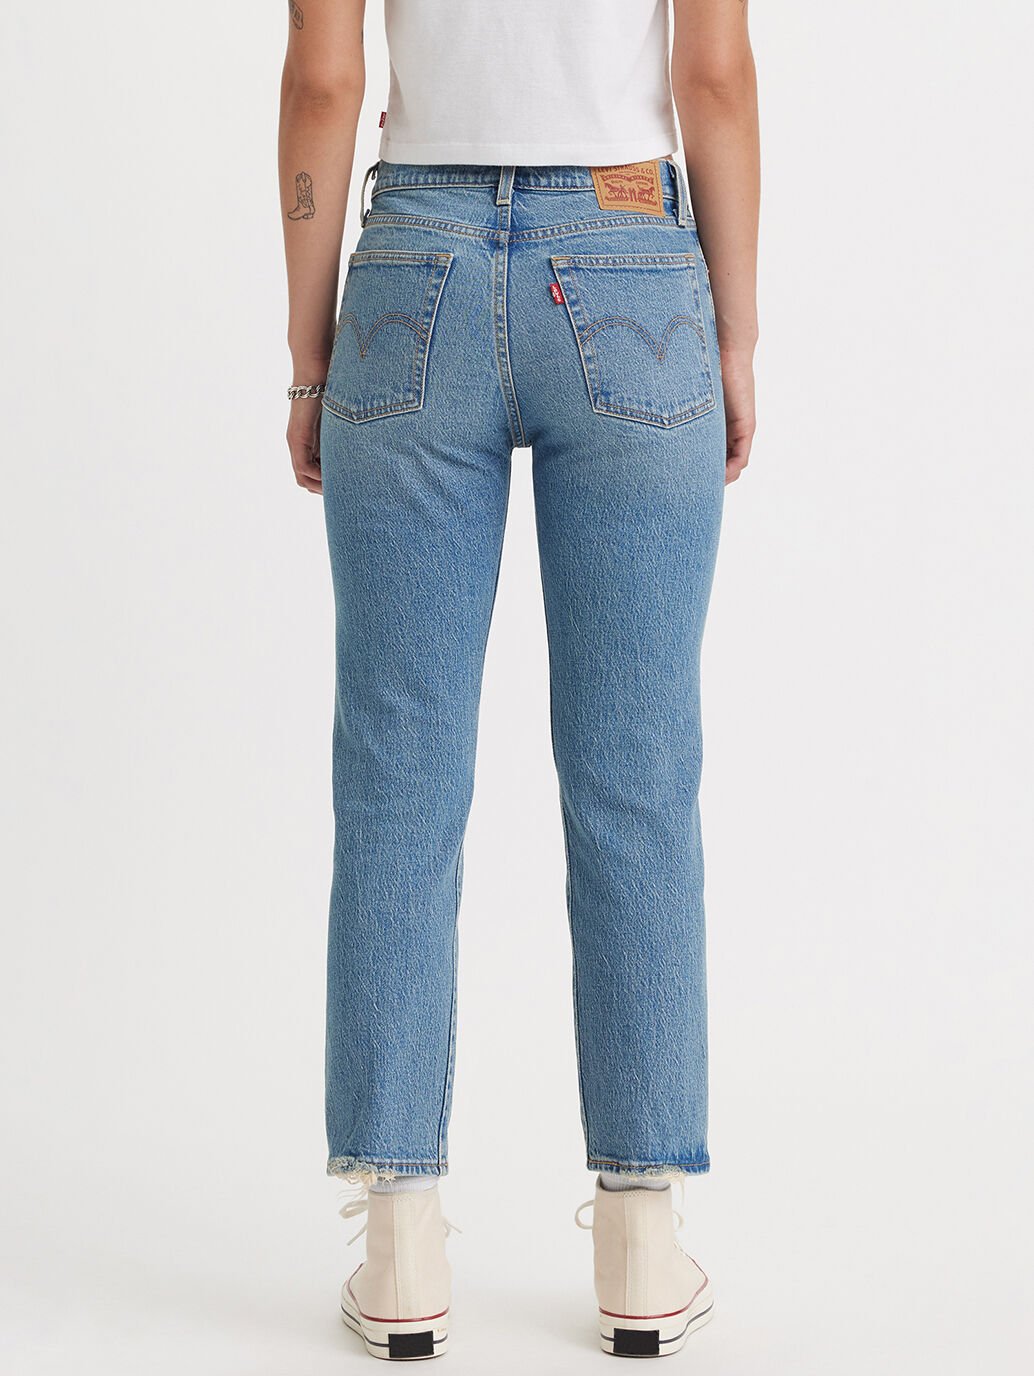 Levi's Womens Wedgie Straight Jeans